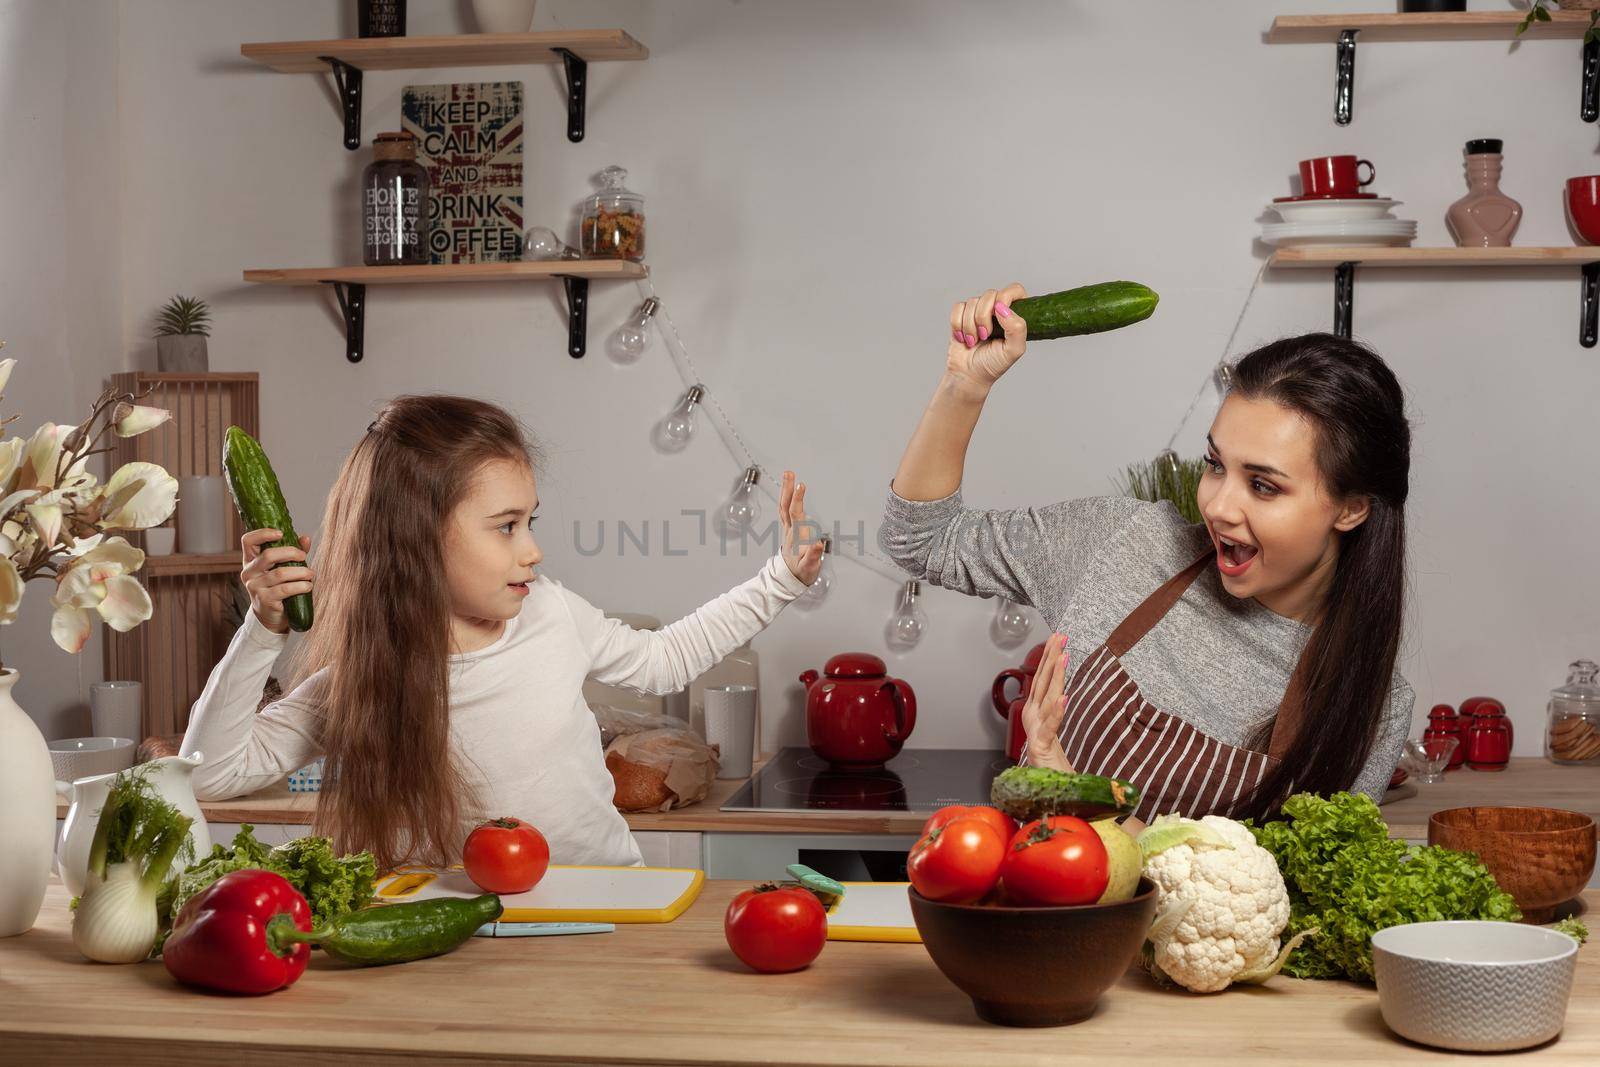 Happy loving family are cooking together. Wonderful mum and her child are fighting each other by cucumbers and having fun at the kitchen, against a white wall with shelves and bulbs on it. Homemade food and little helper.